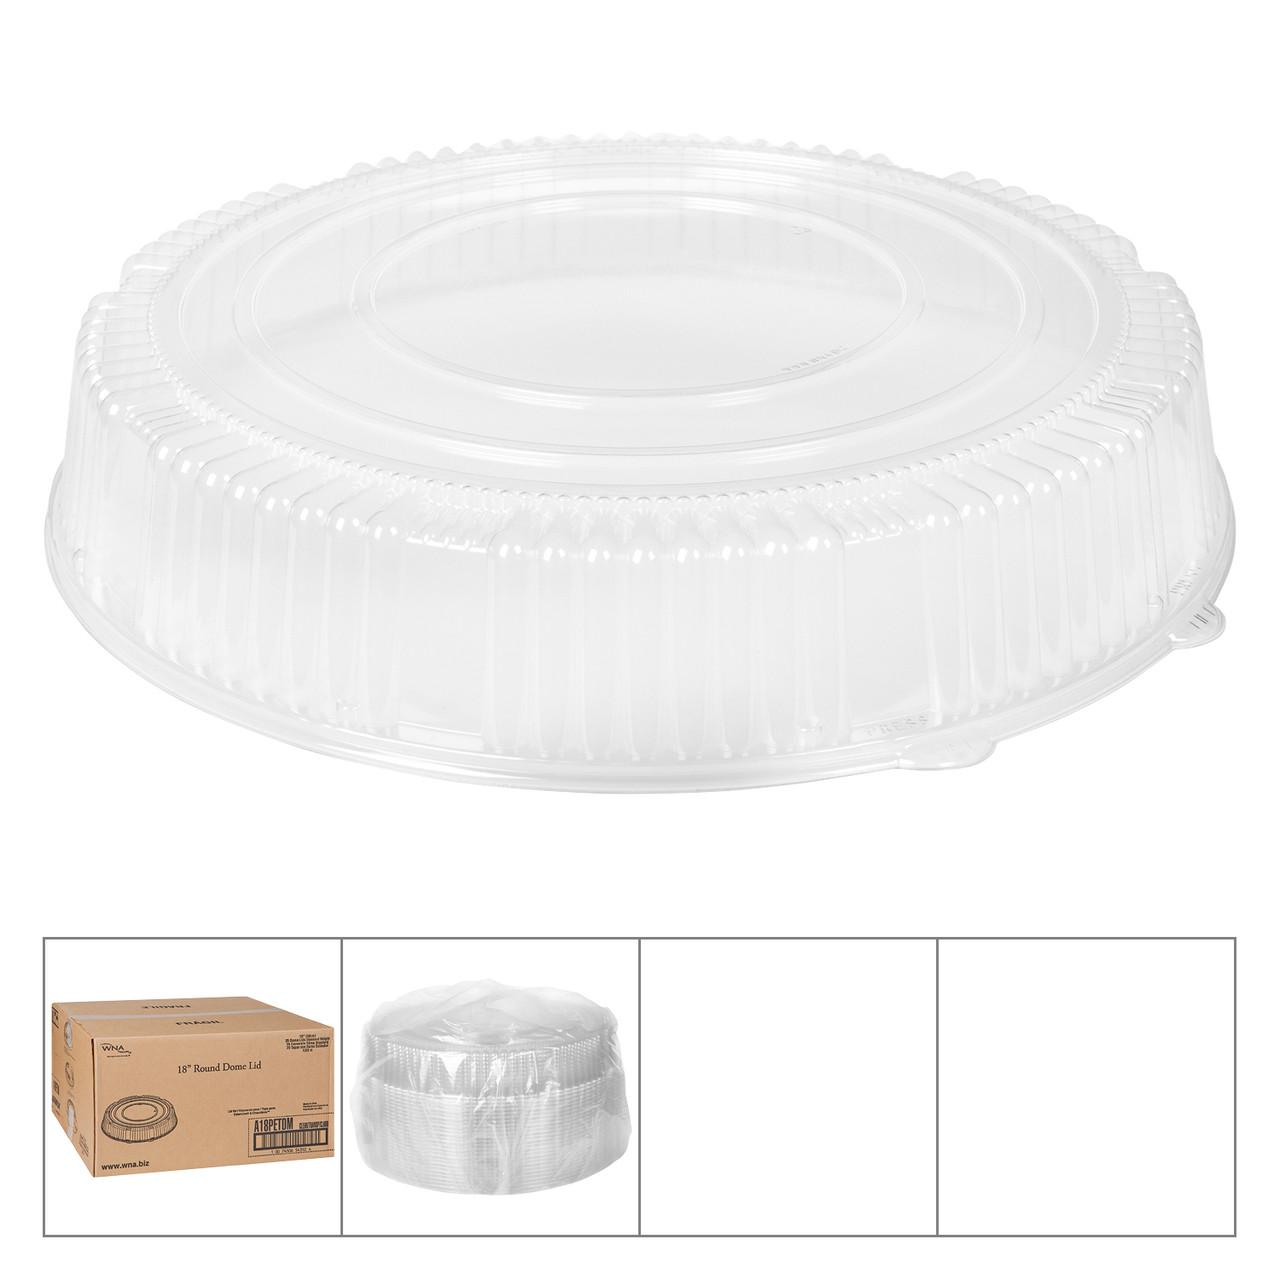 Casuals™ Round Tray 18” Clear Round Dome Lid Std - 2.75” high (A18PETDM)